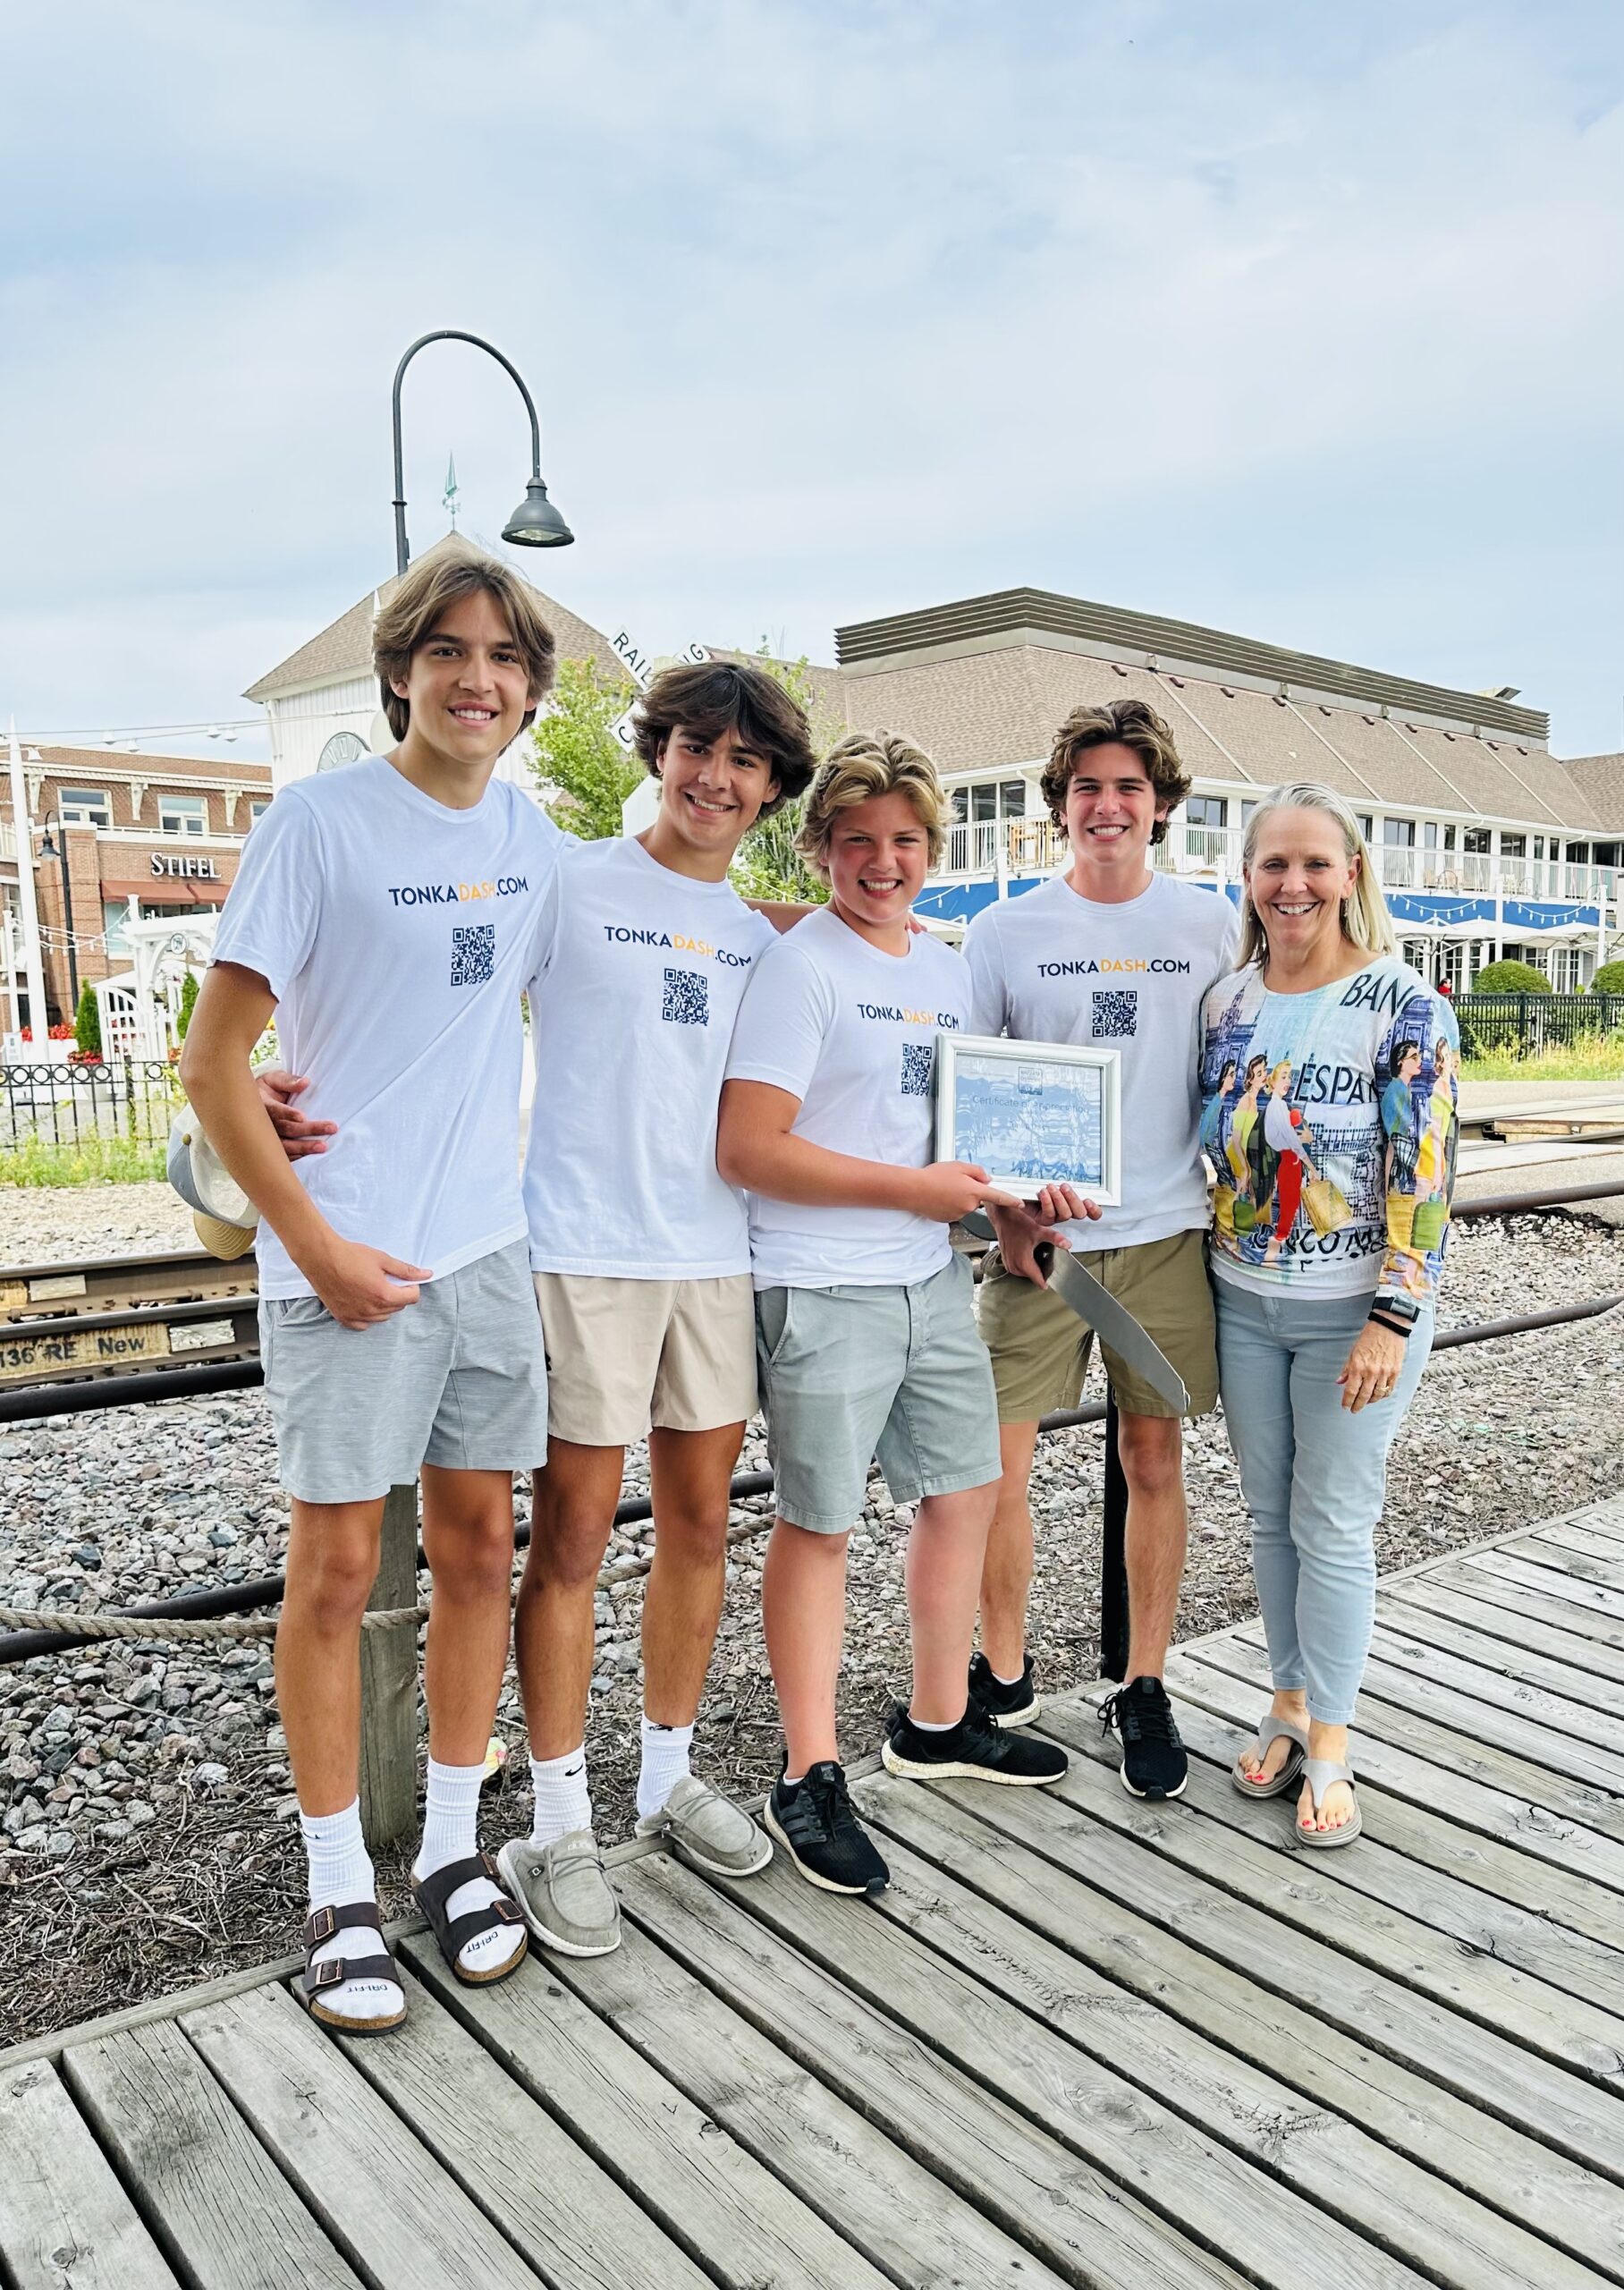 Upon the launch of Tonka Dash on June 9, the Wayzata Chamber of Commerce issued a Certificate of Appreciation. Left to right: Max Alberti, co-founder, Plymouth; Gus Foster, dasher, Wayzata; Williston and Jack Reger, co-founders, Wayzata; Becky Pierson, president, Wayzata Chamber of Commerce.